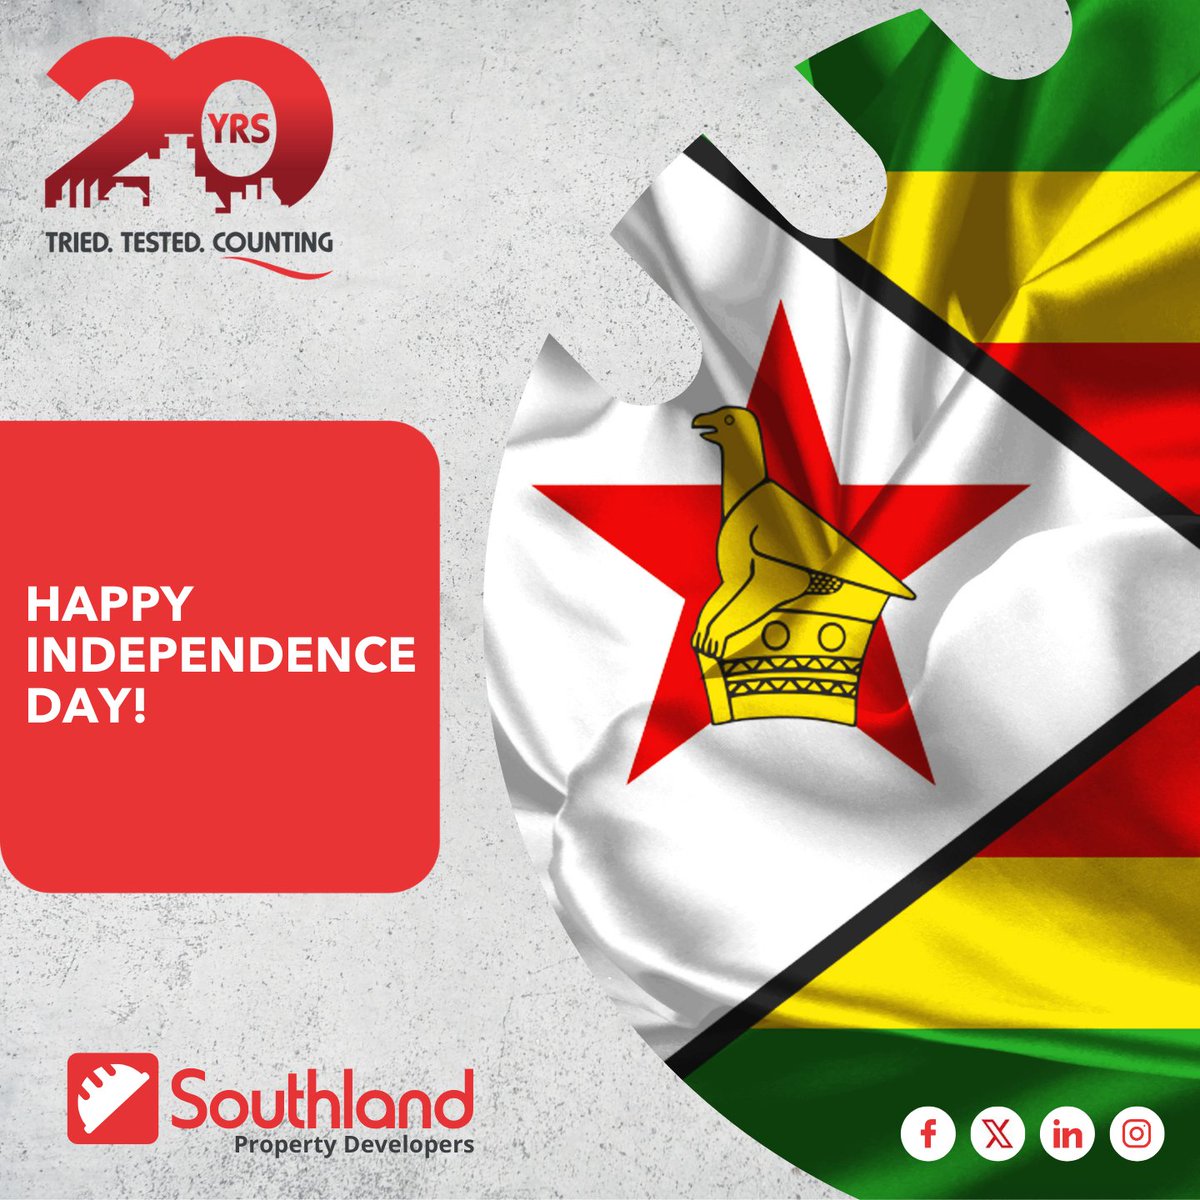 Happy Independence Day to all Zimbabweans. #ZimbabweTurns44 #ZimbabweIndependence